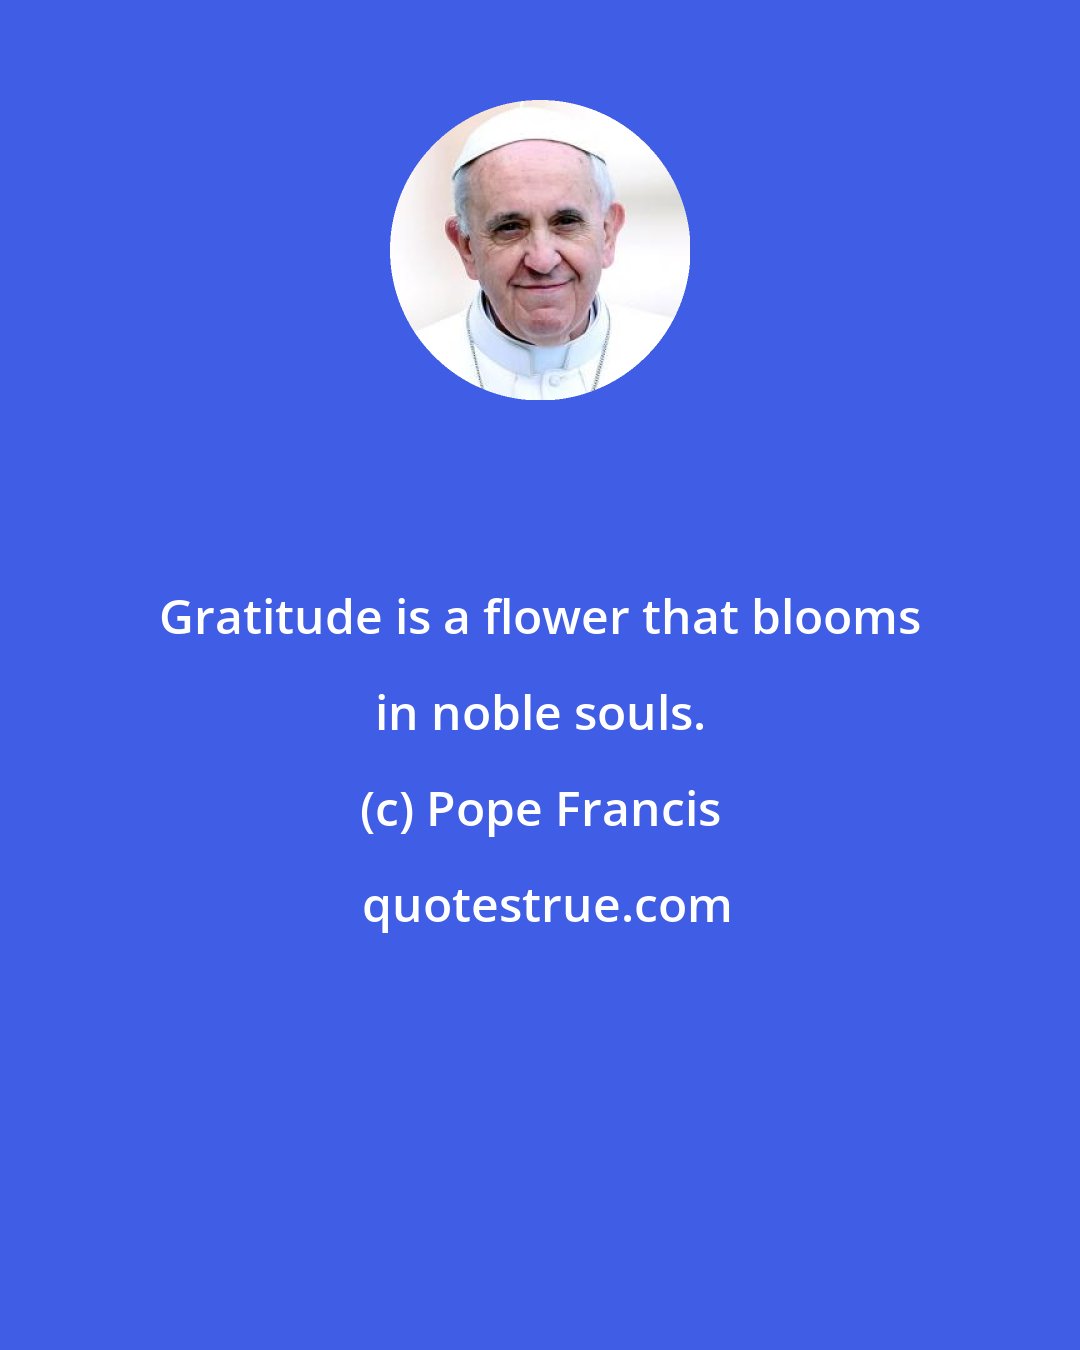 Pope Francis: Gratitude is a flower that blooms in noble souls.